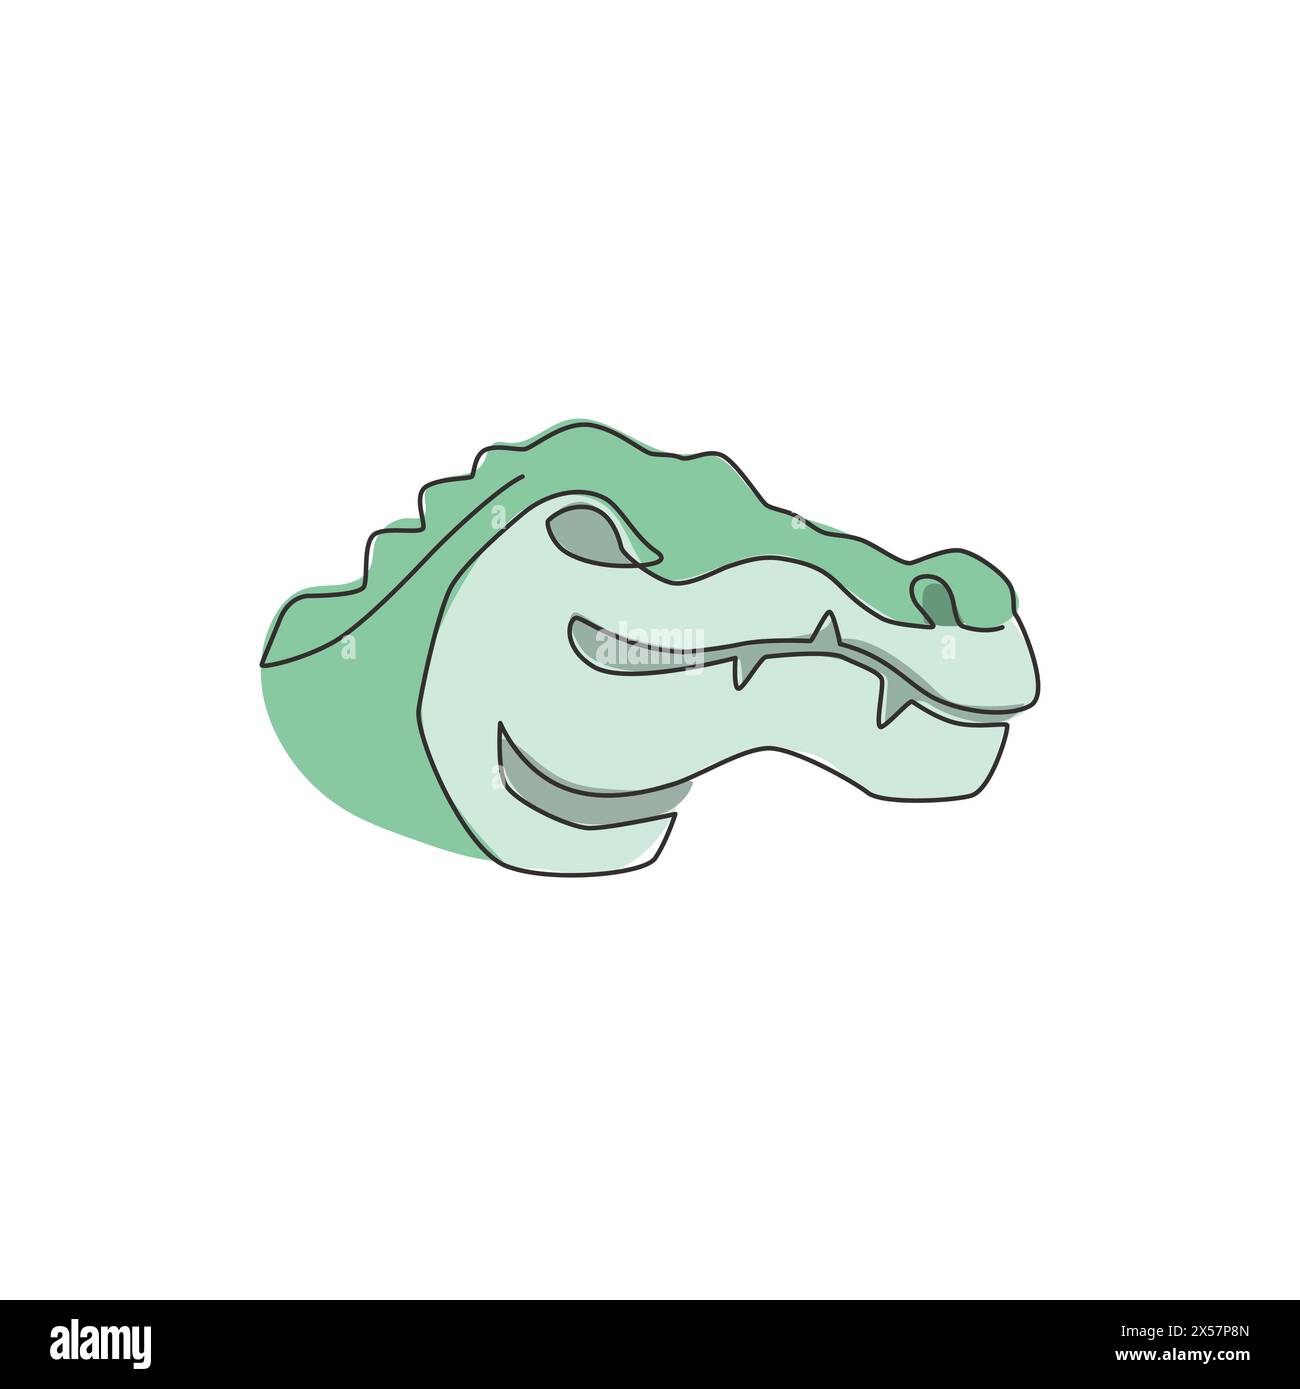 One single line drawing of scary head river swamp alligator for logo identity. Reptile animal crocodile concept for national zoo icon. Modern continuo Stock Vector